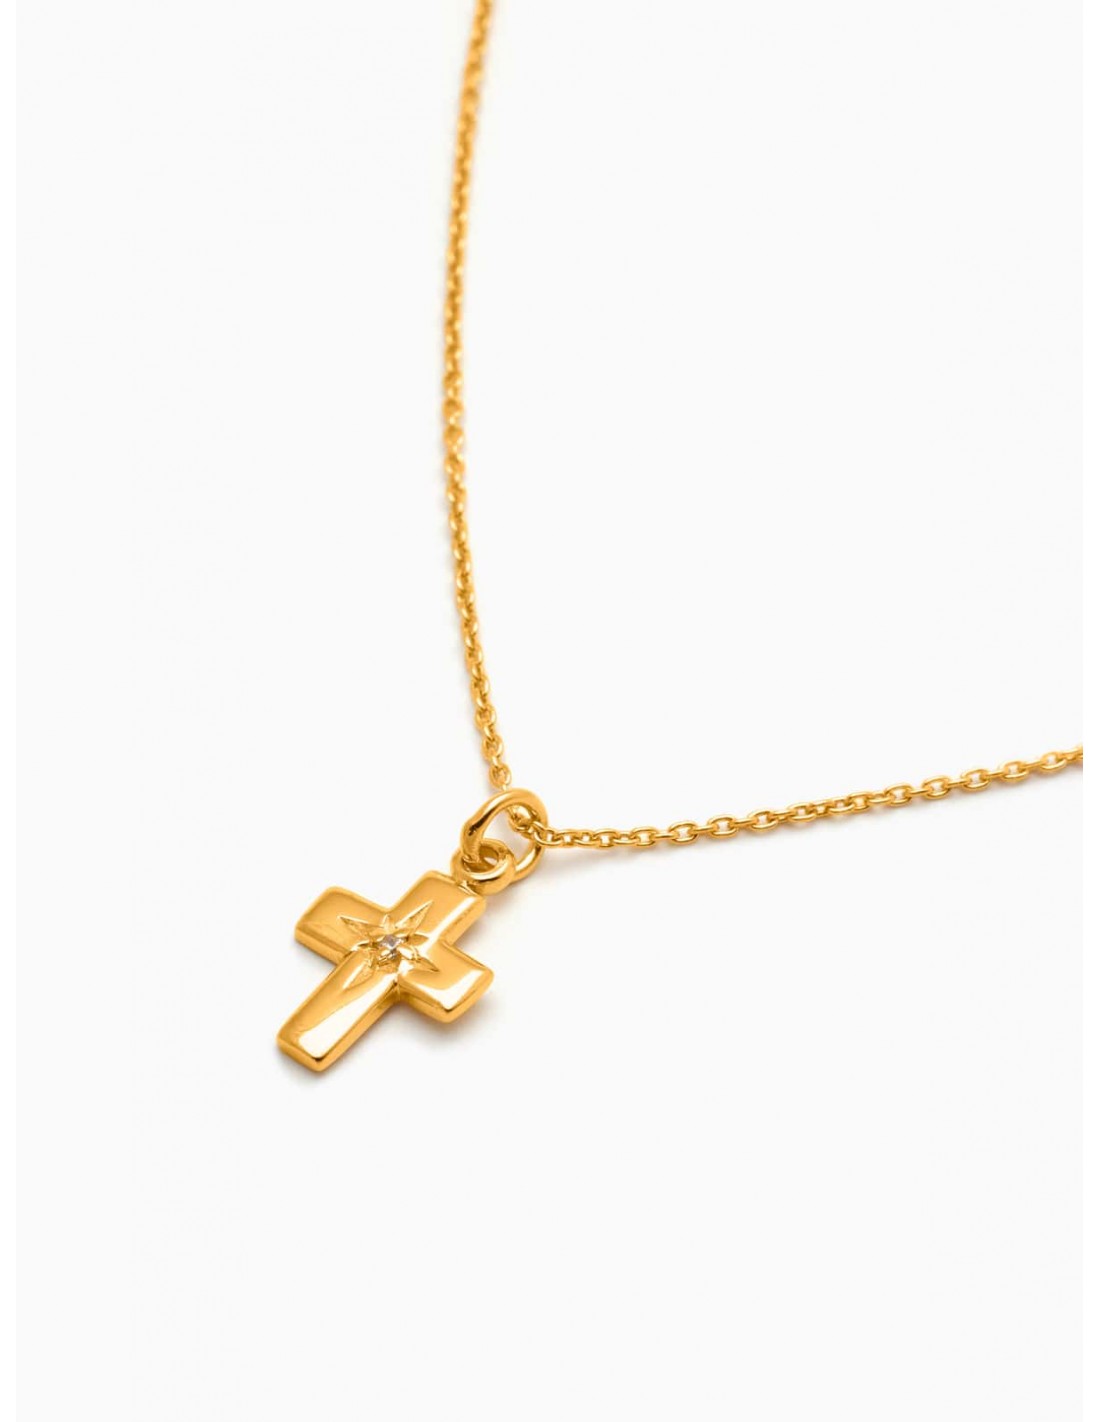 STERLING SILVER CROSS NECKLACE